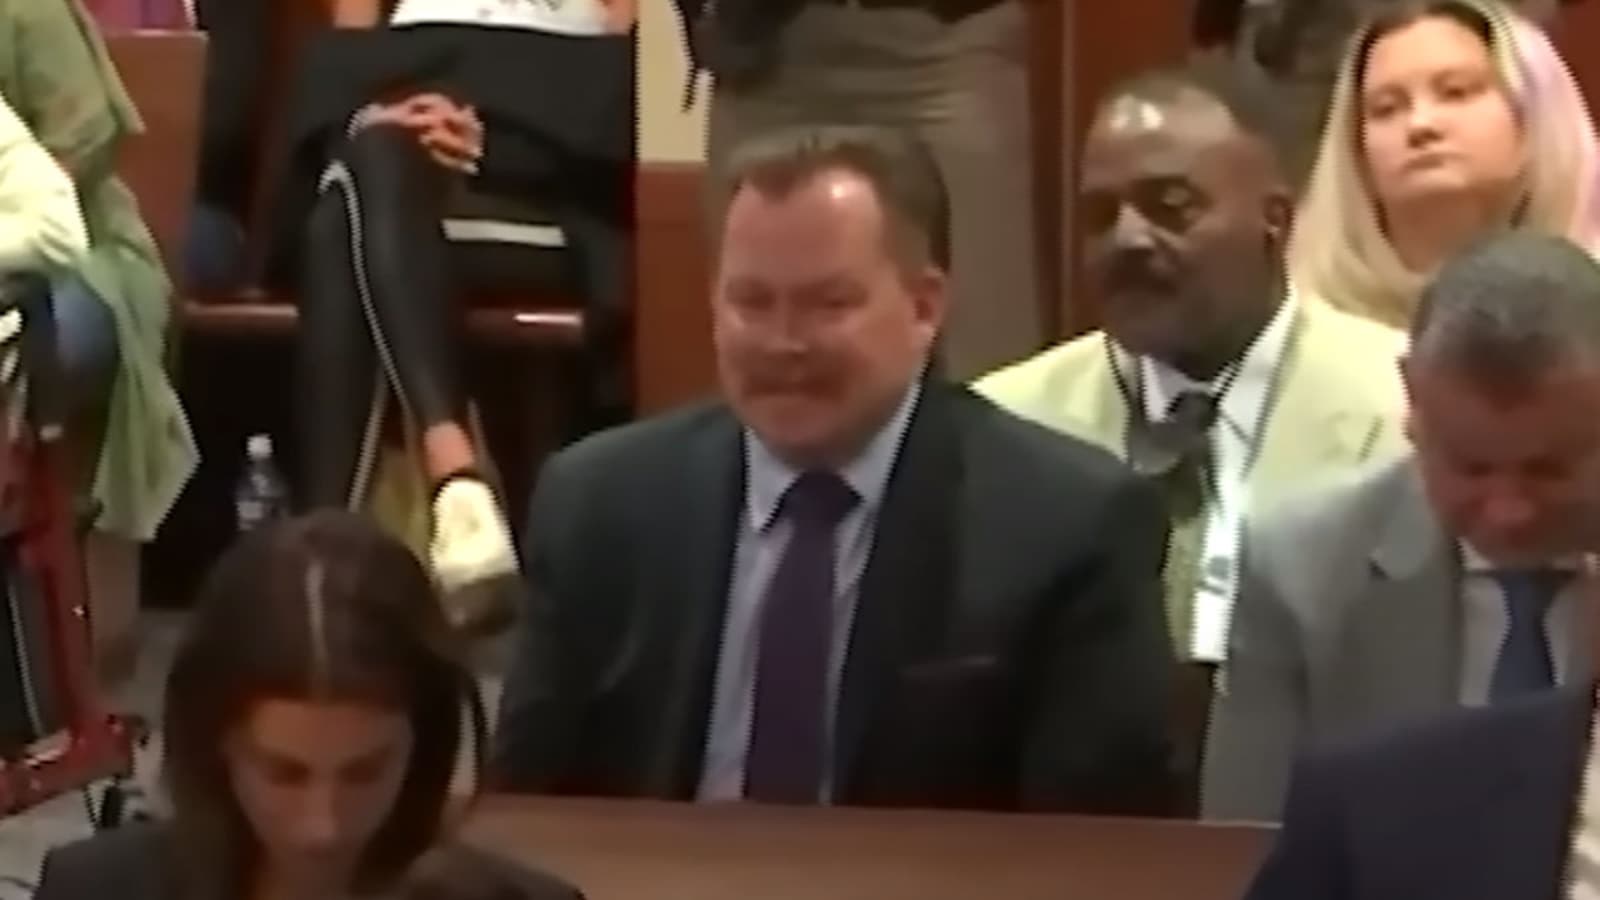 Man laughing uncontrollably during Amber Heard Johnny Depp s trial goes